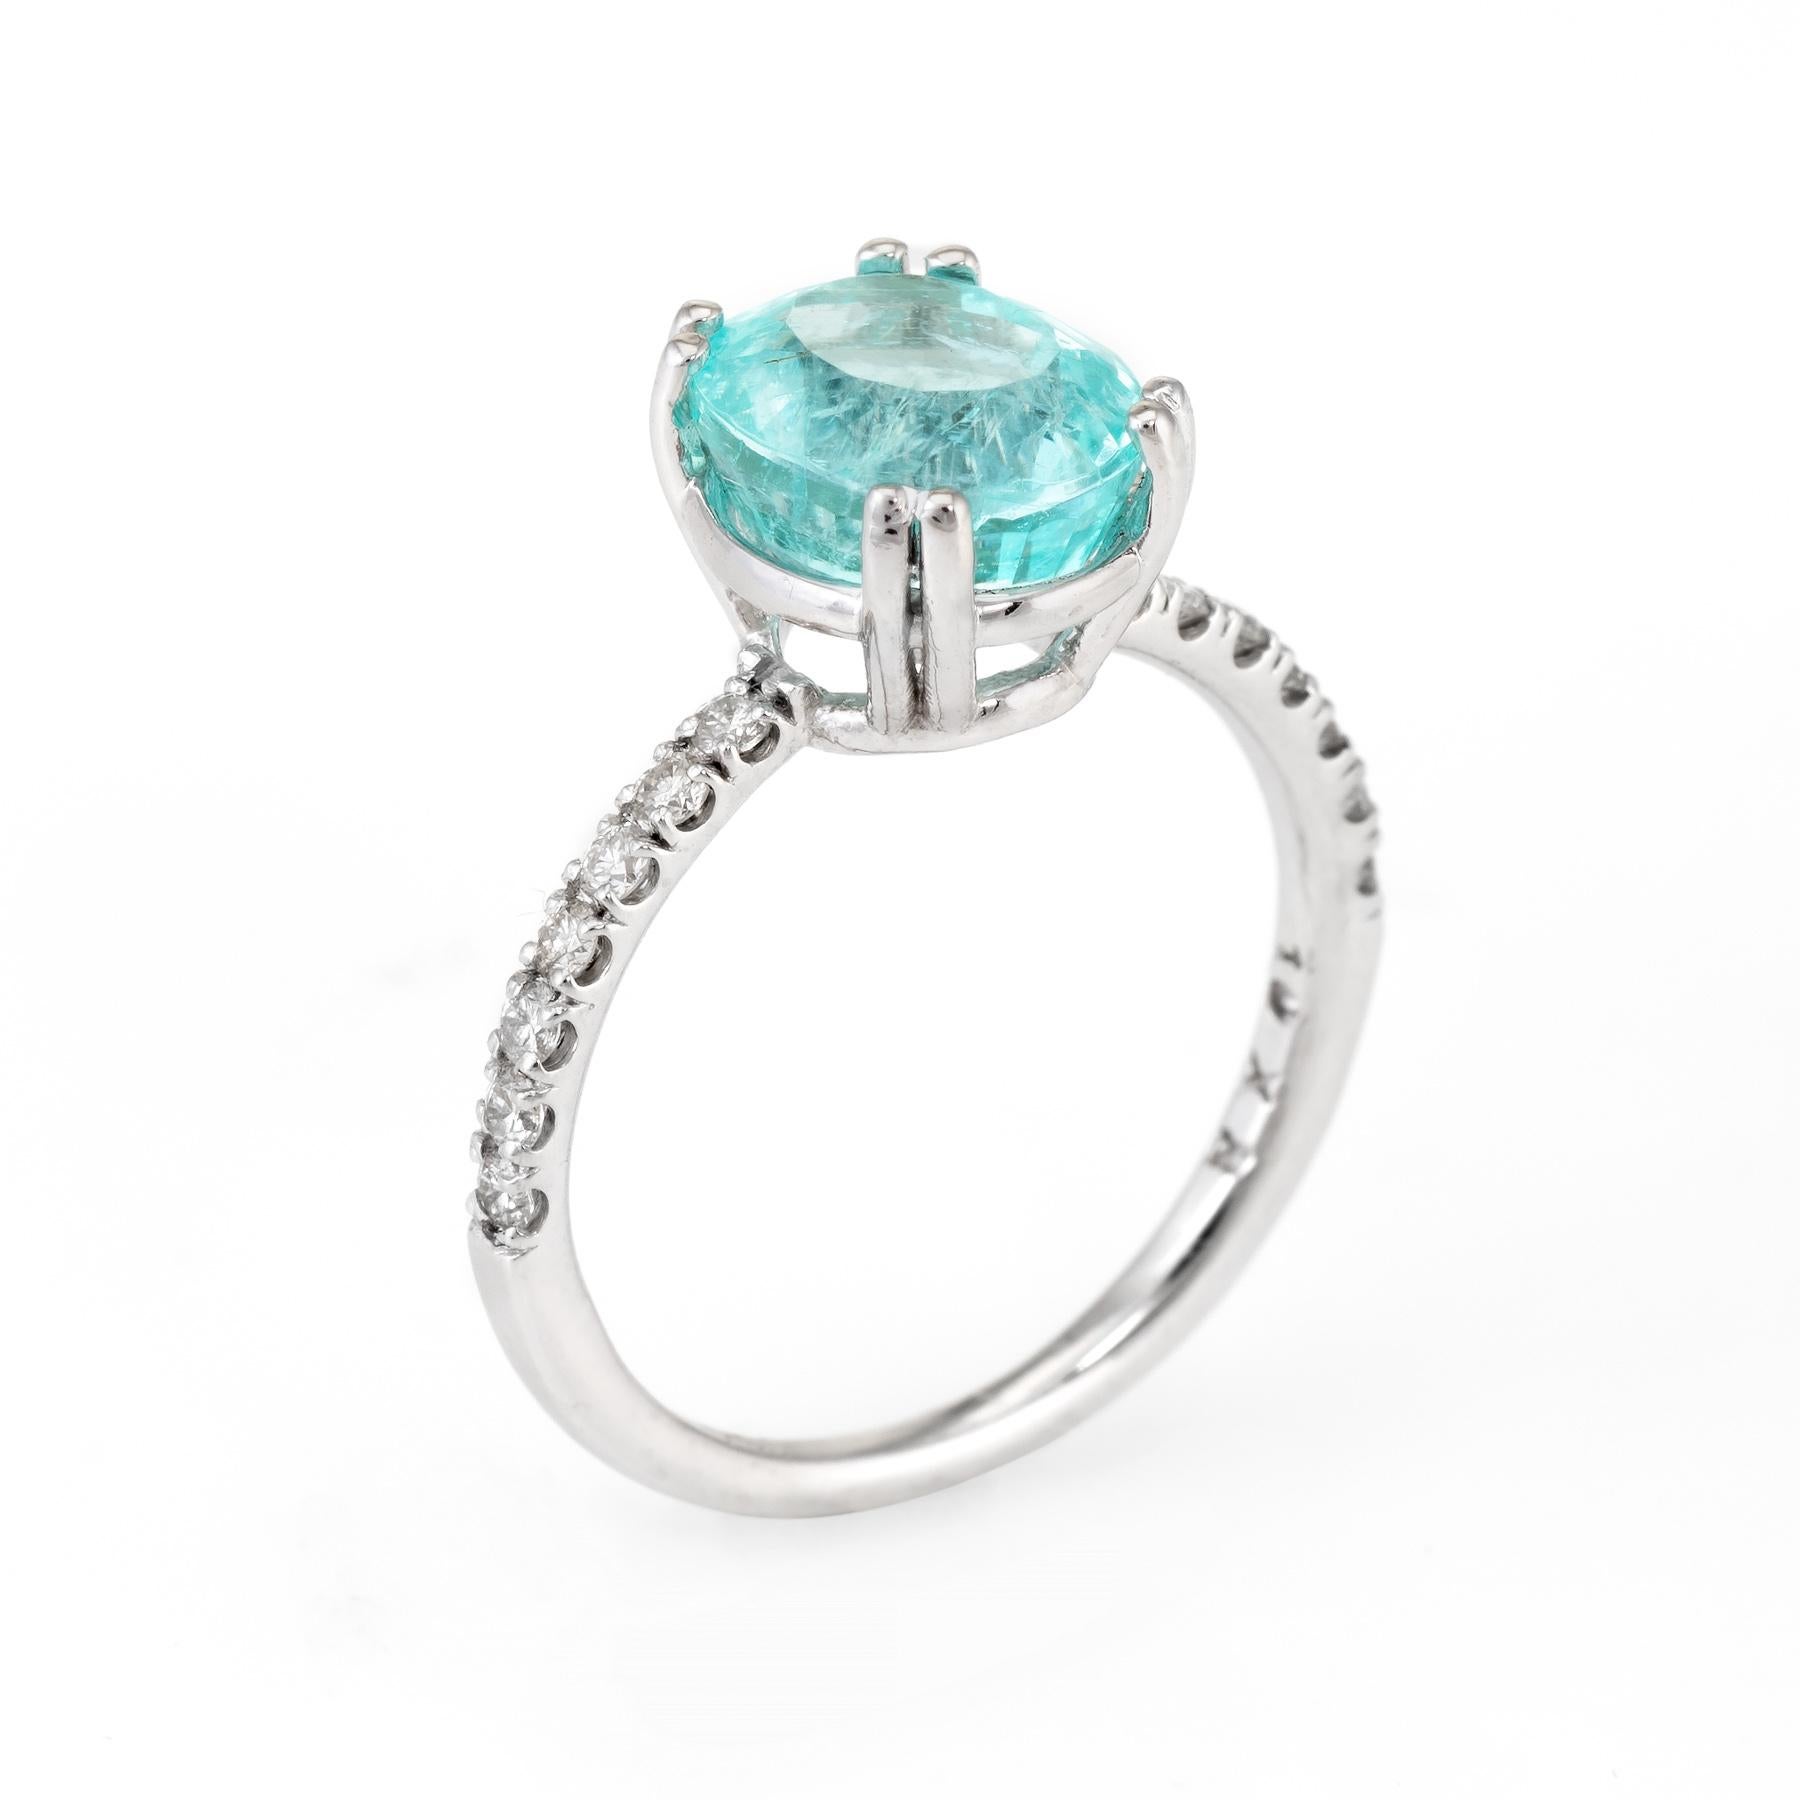 Finely detailed estate ring, crafted in 14 karat white gold. 

GIA certified Paraiba tourmaline measures 9.73 x 8.12 x 6.15mm (3.34 carats). The oval shaped stone is transparent with a green blue color. The origin of the tourmaline is Mozambique.